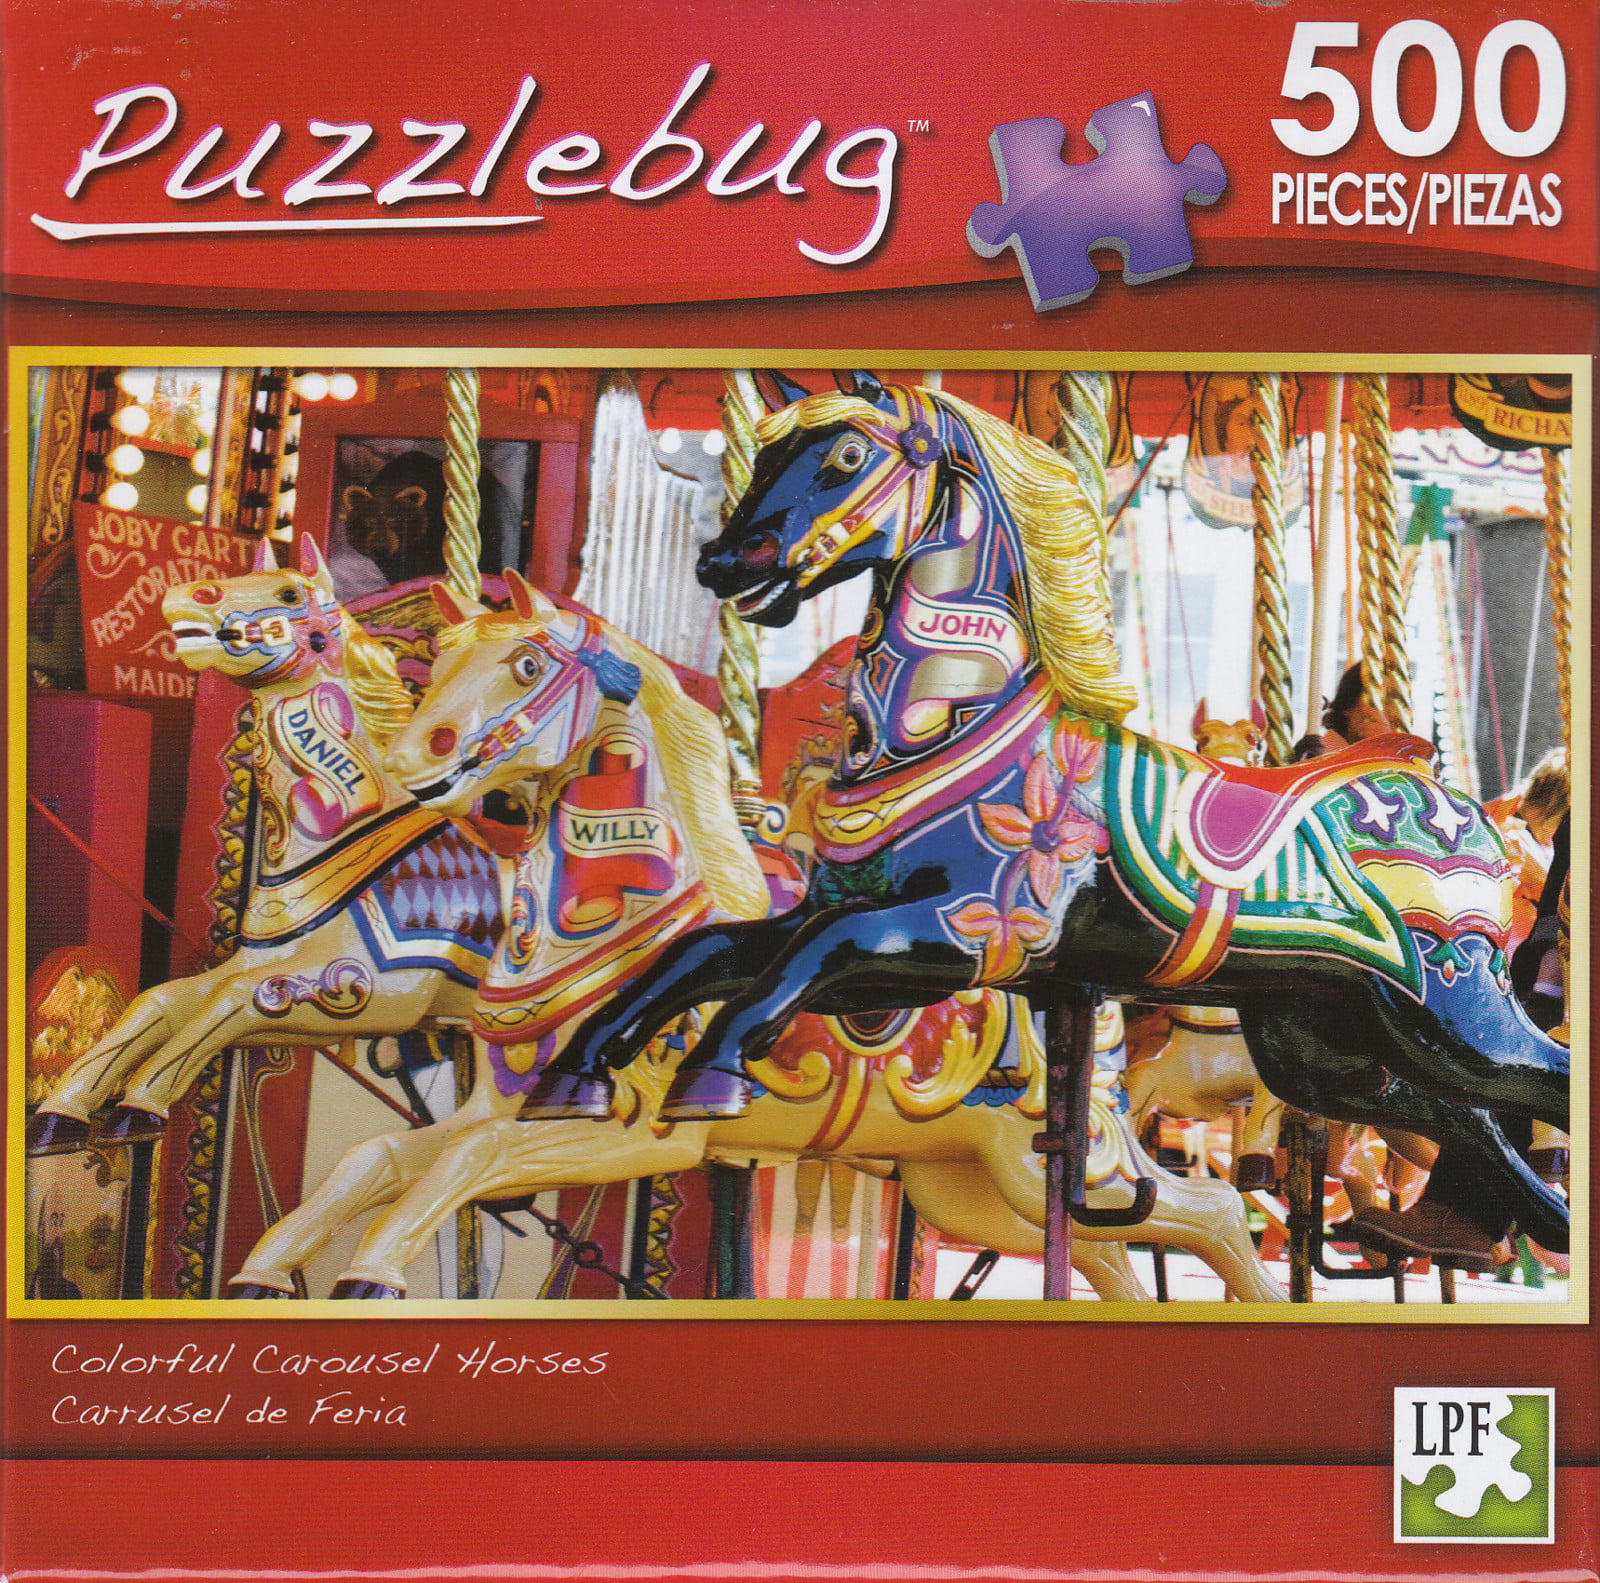 Puzzle Bug 300 Pieces by Cra Z Art Black Beauty Carousel Horse 